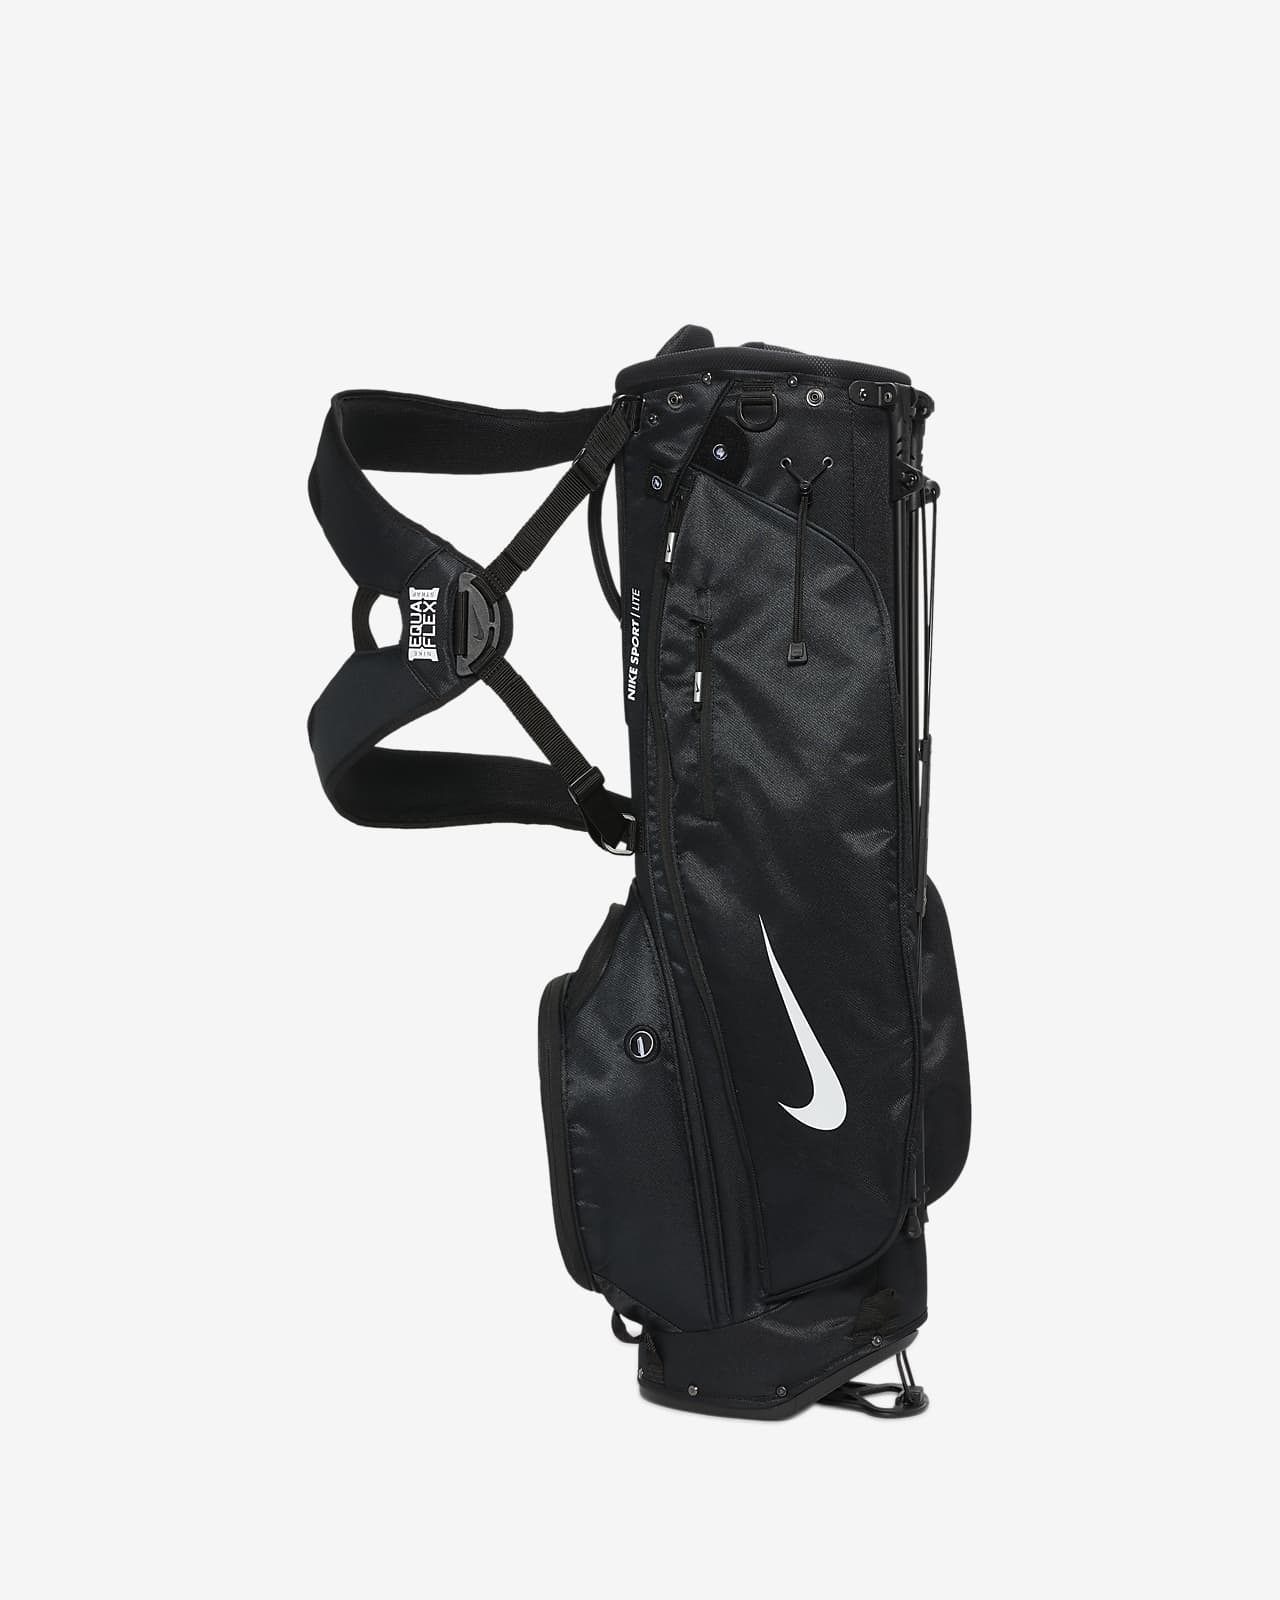 passionate classmate Looting New Nike Golf Bag Top Sellers, SAVE 46% - aveclumiere.com